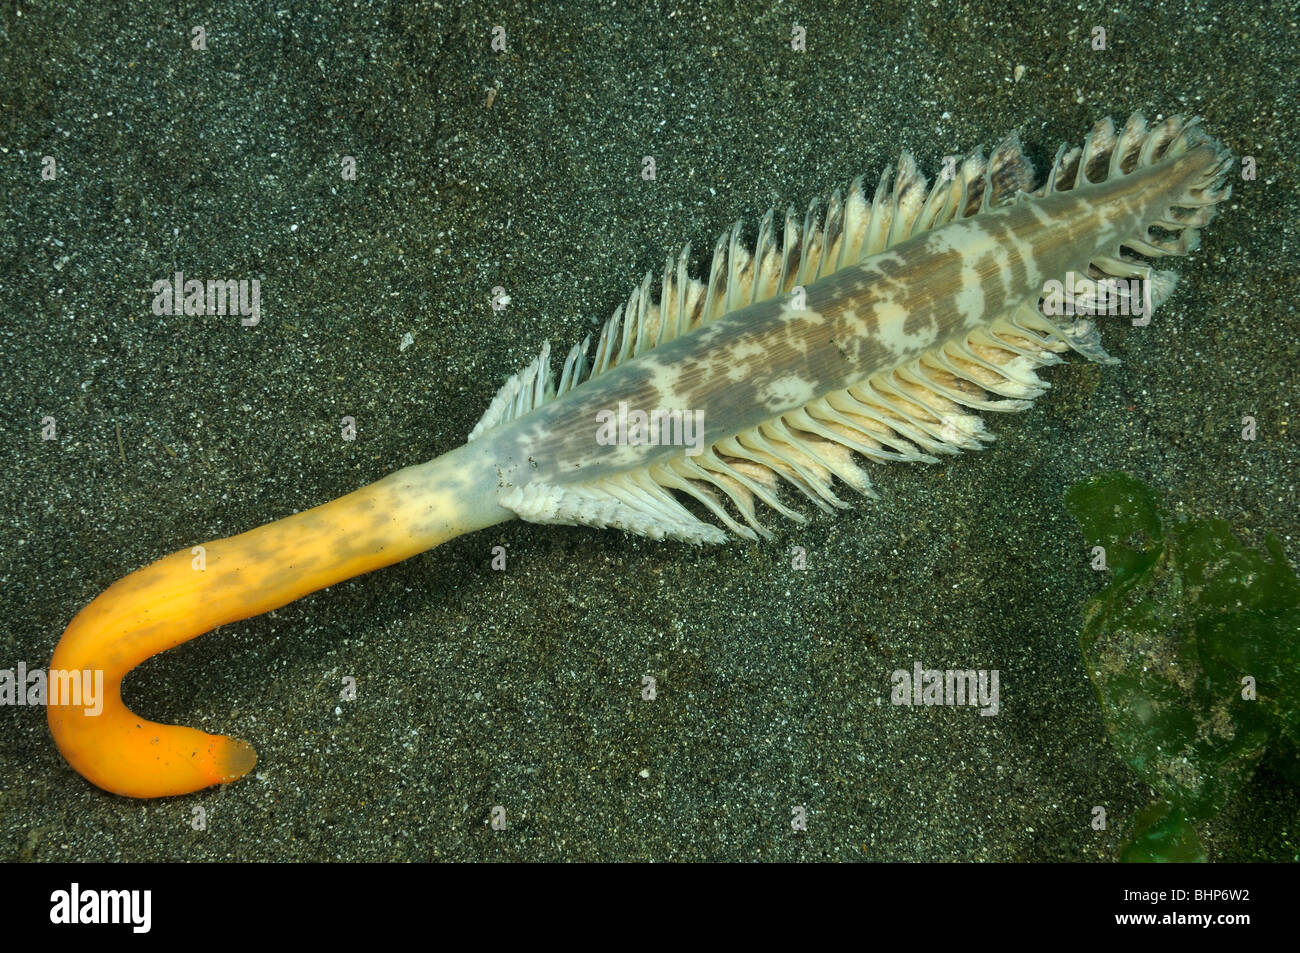 Sea Pen outside with its foot visible, Secret Bay, Gilimanuk, Bali, Indonesia, Indo-Pacific Ocean Stock Photo